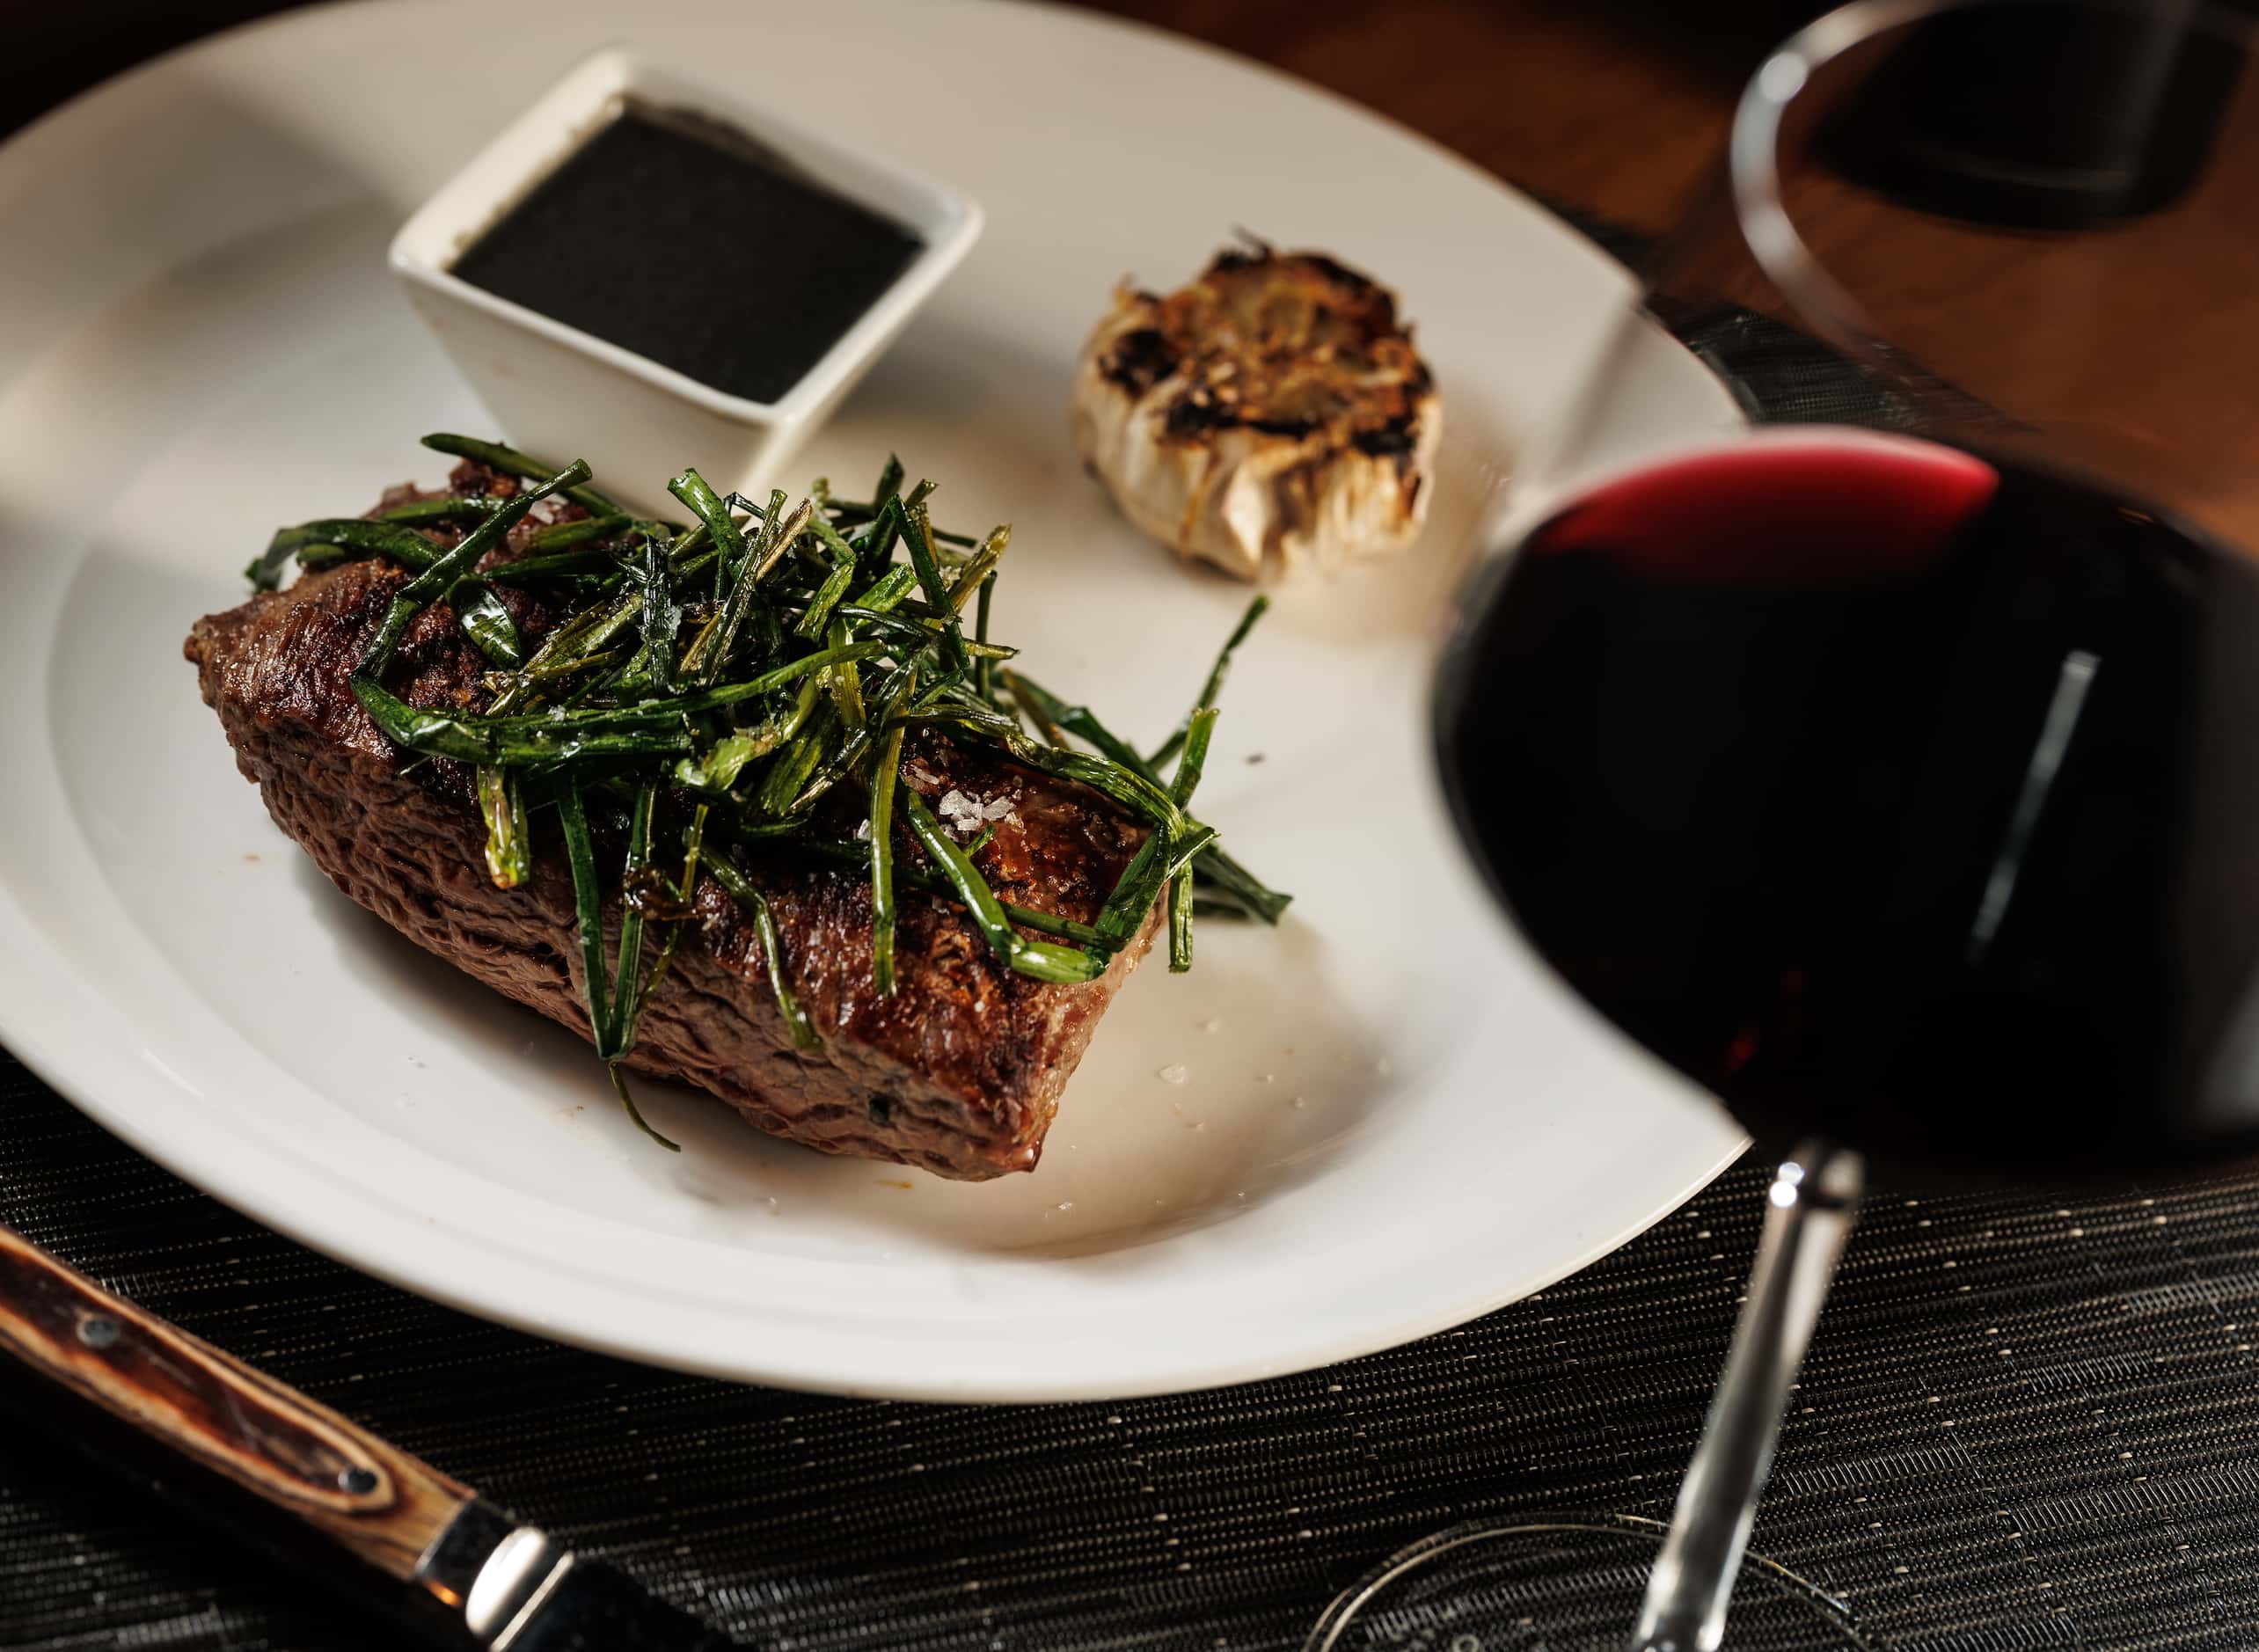 Some of the options at The Mexican and Dallas can be as classic steak and a glass of red wine.